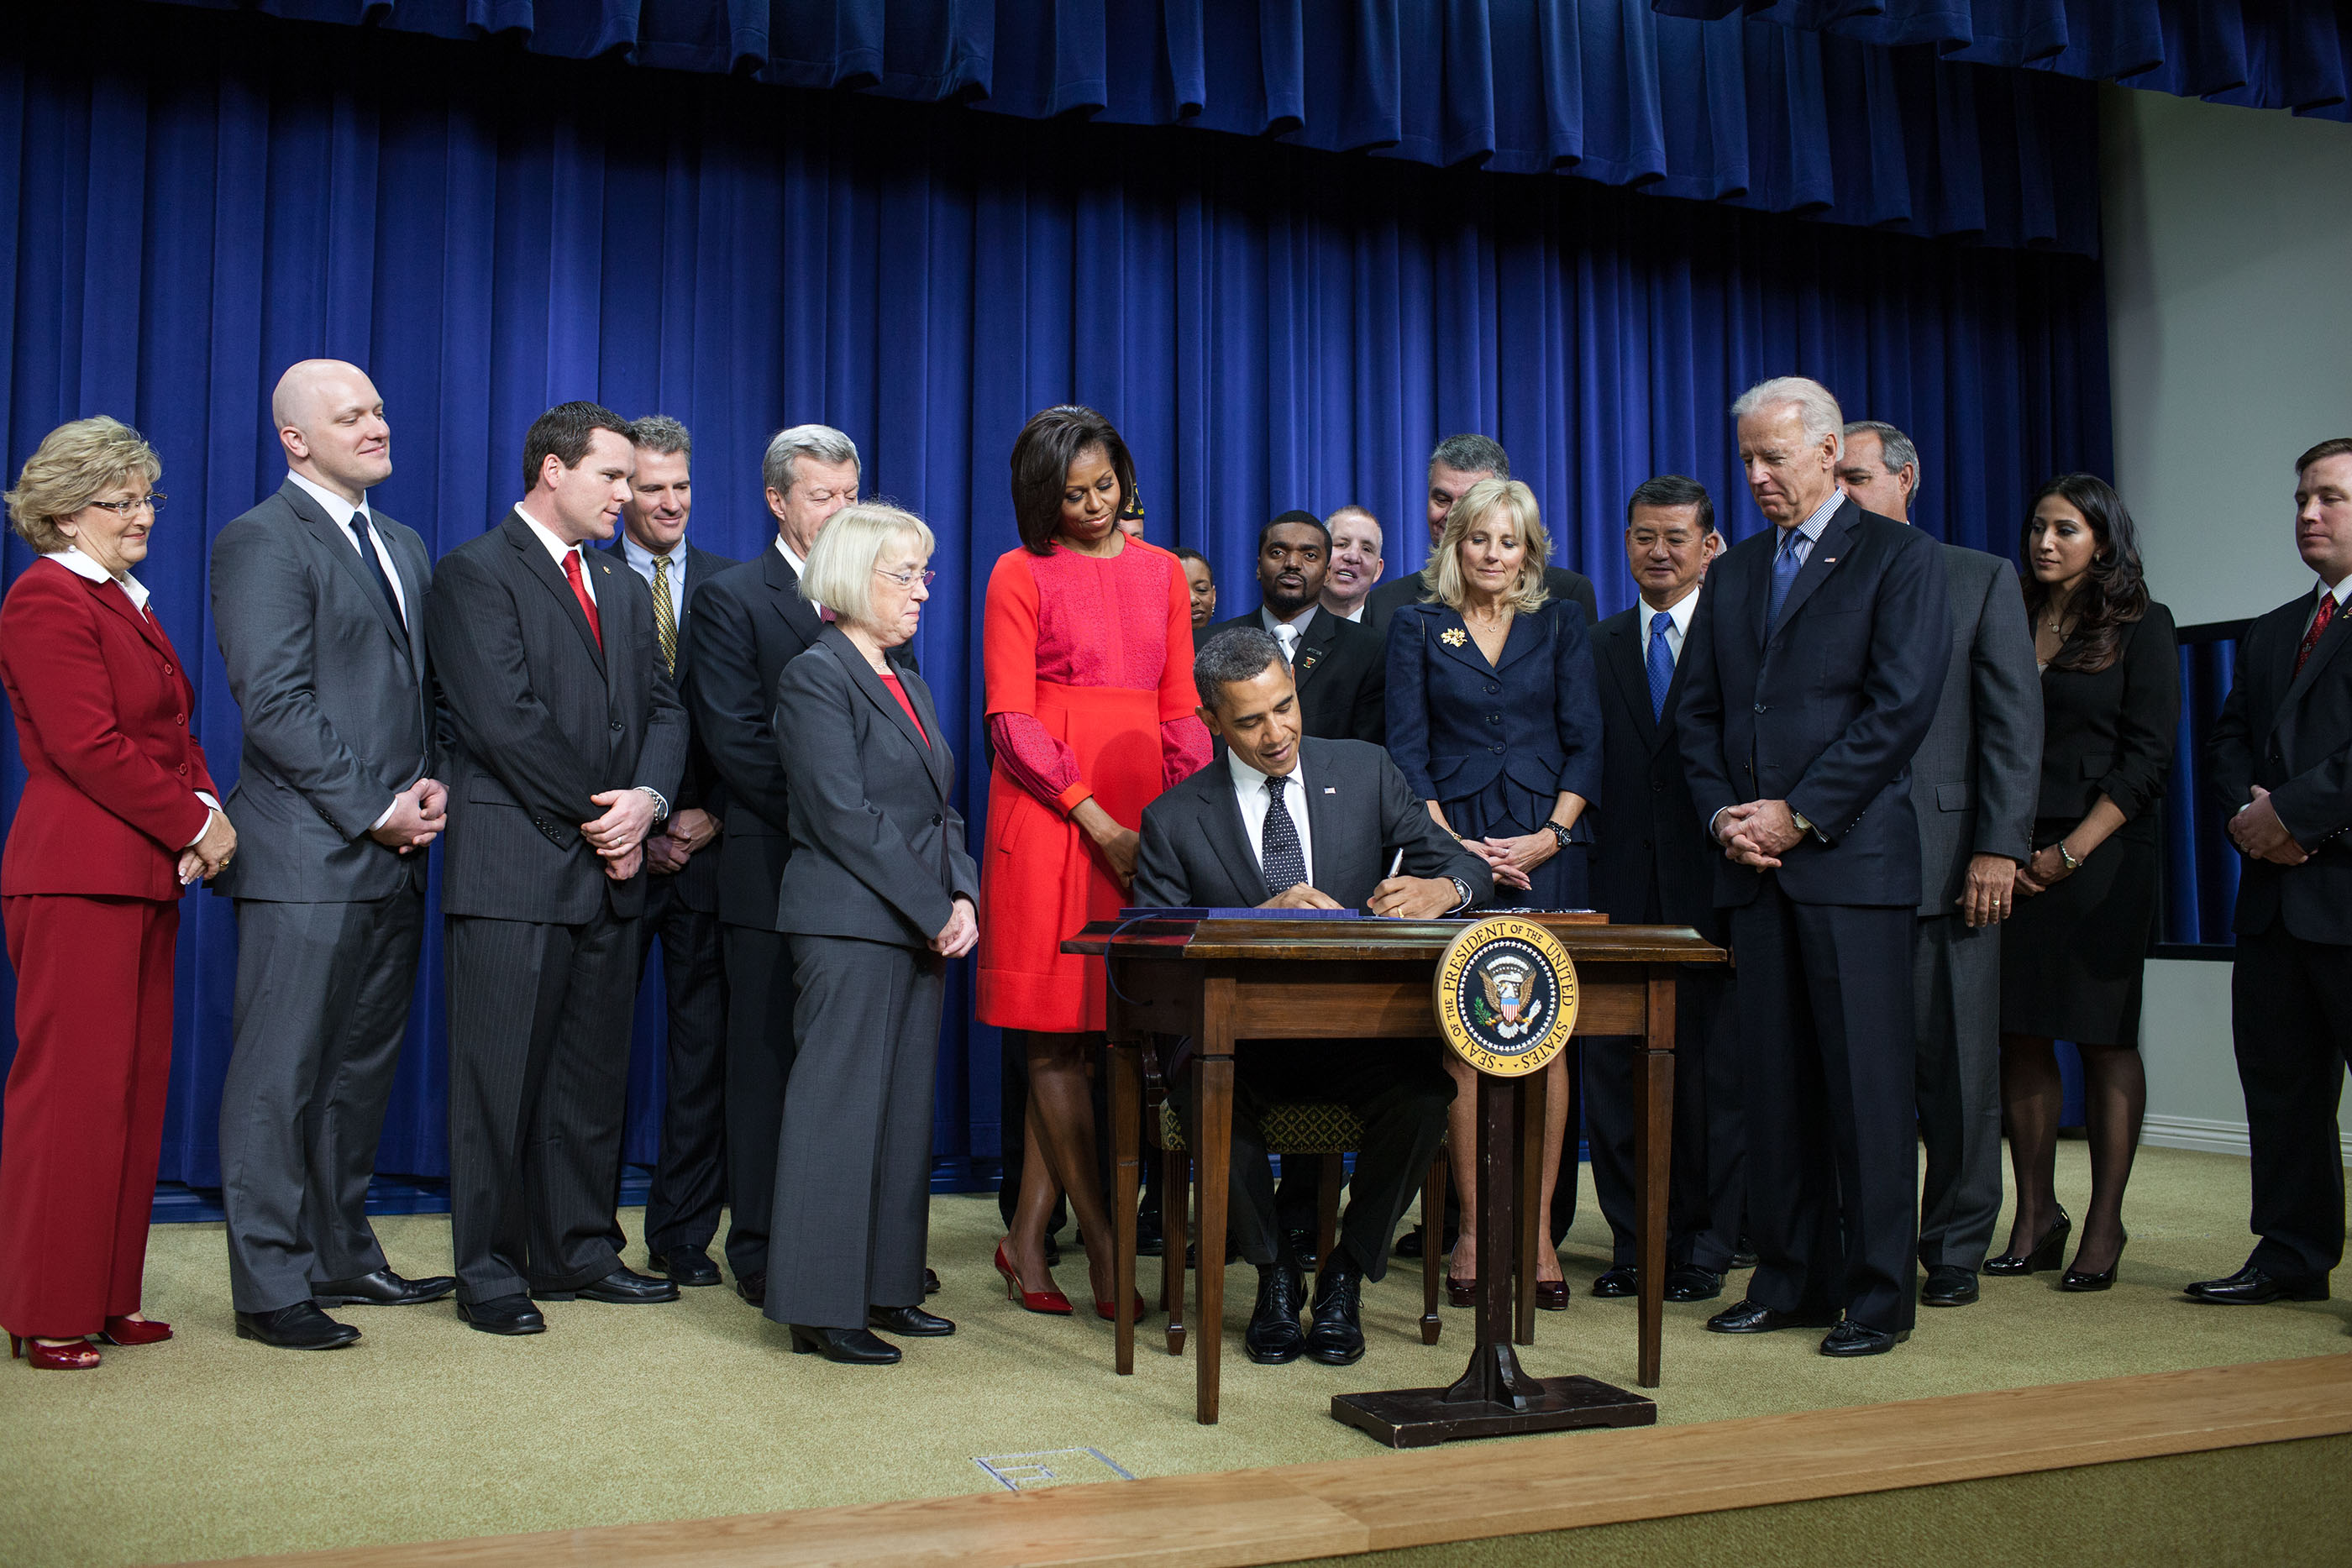 The President signs the Veterans Opportunity to Work to Hire Heroes Act of 2011 at the Eisenhower Executive Office Building, Nov. 21, 2011. (Official White House Photo by Pete Souza)